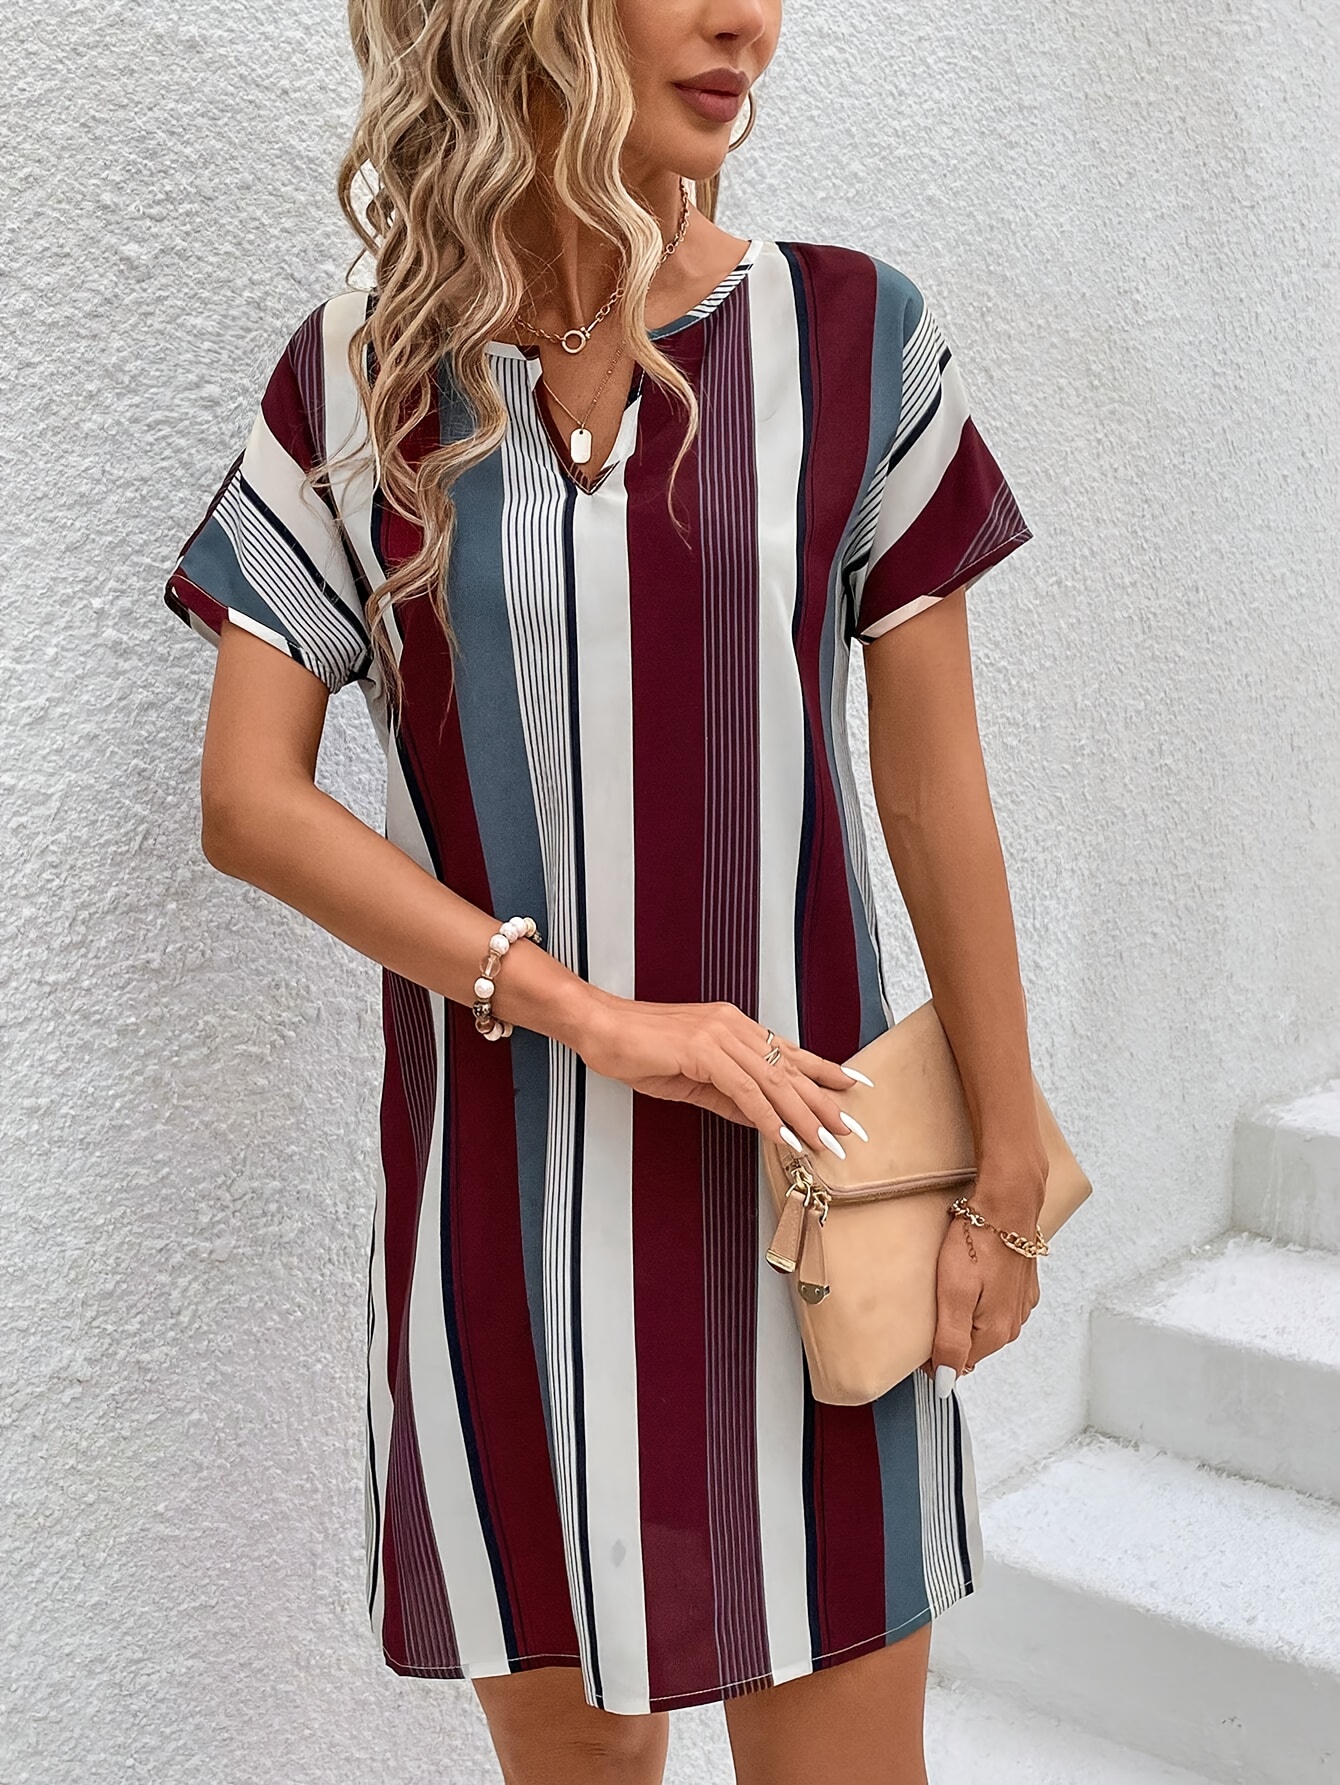 striped print notched neck dress casual short sleeve dress for spring summer womens clothing details 3